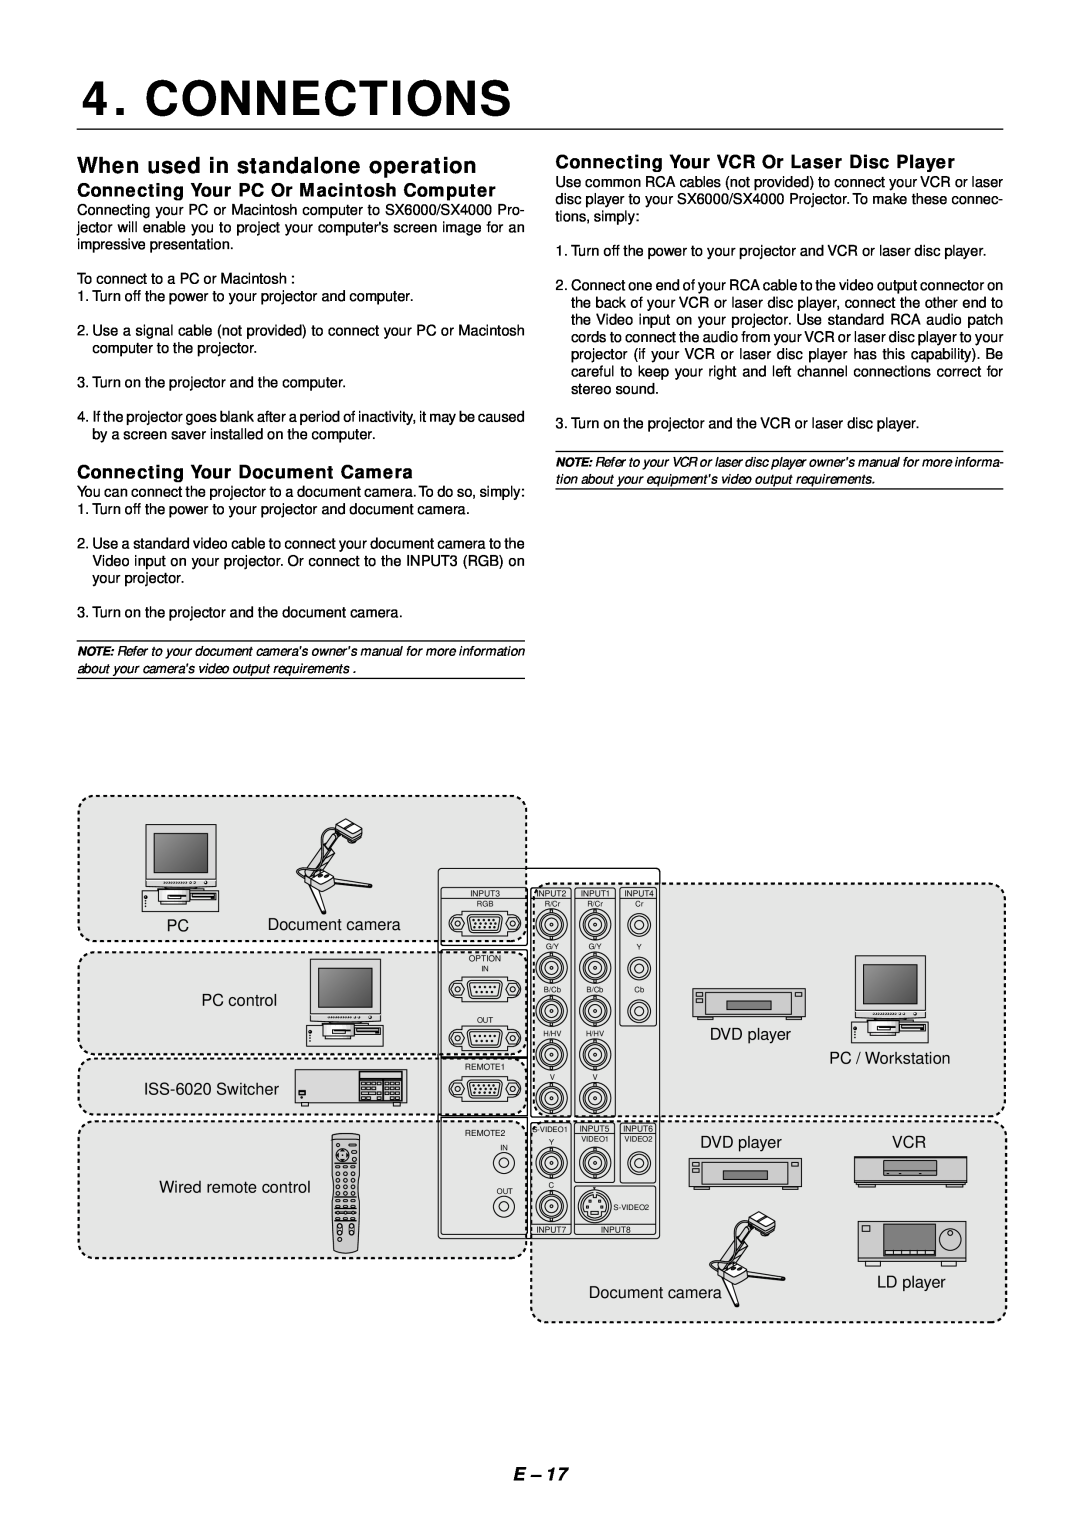 NEC SX4000 Connections, When used in standalone operation, Connecting Your PC Or Macintosh Computer, PC control, LD player 